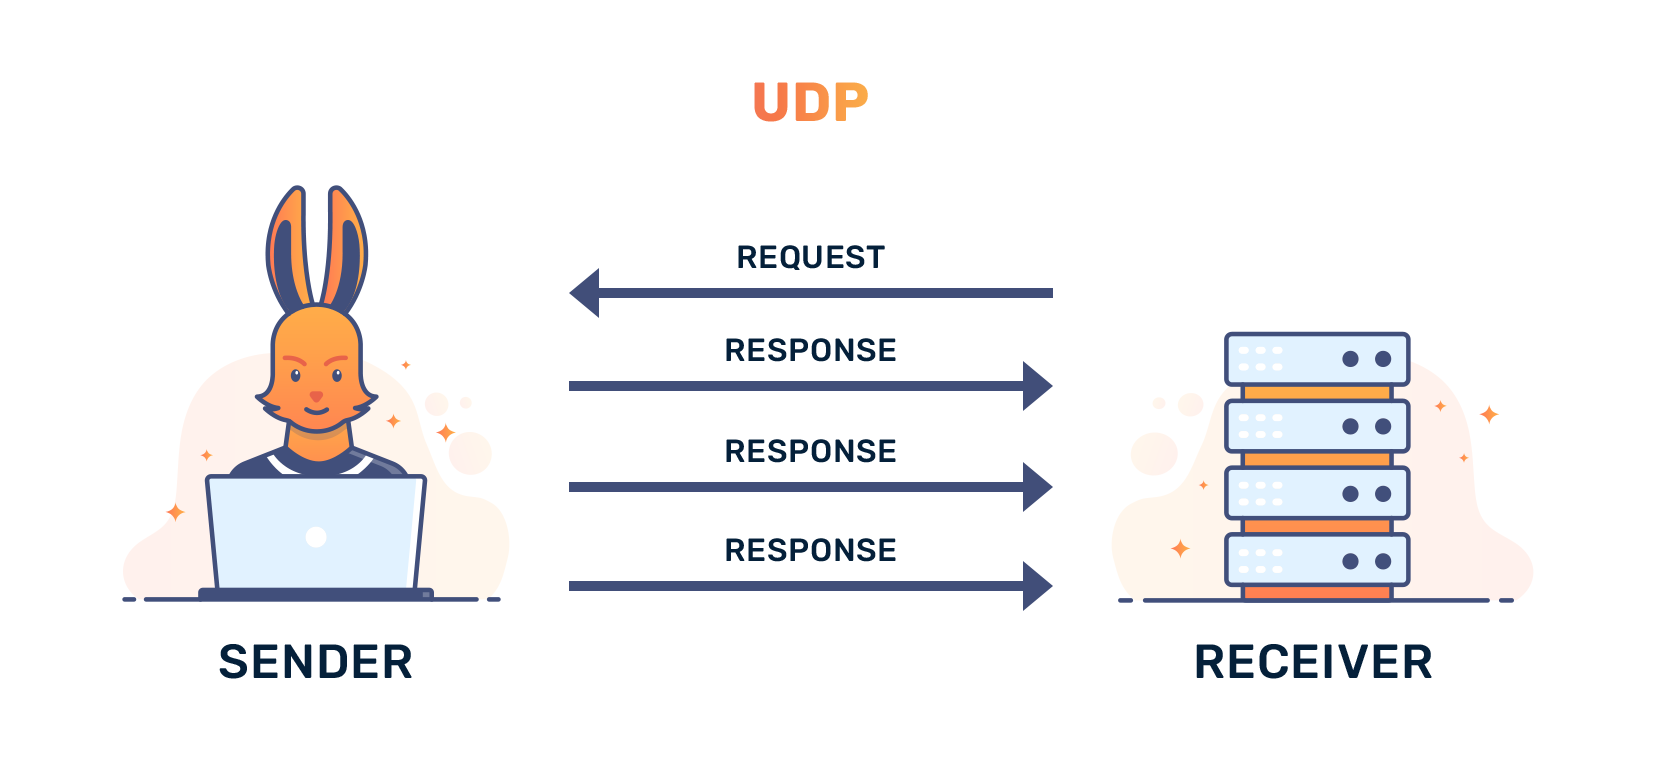 What Is the UDP Protocl